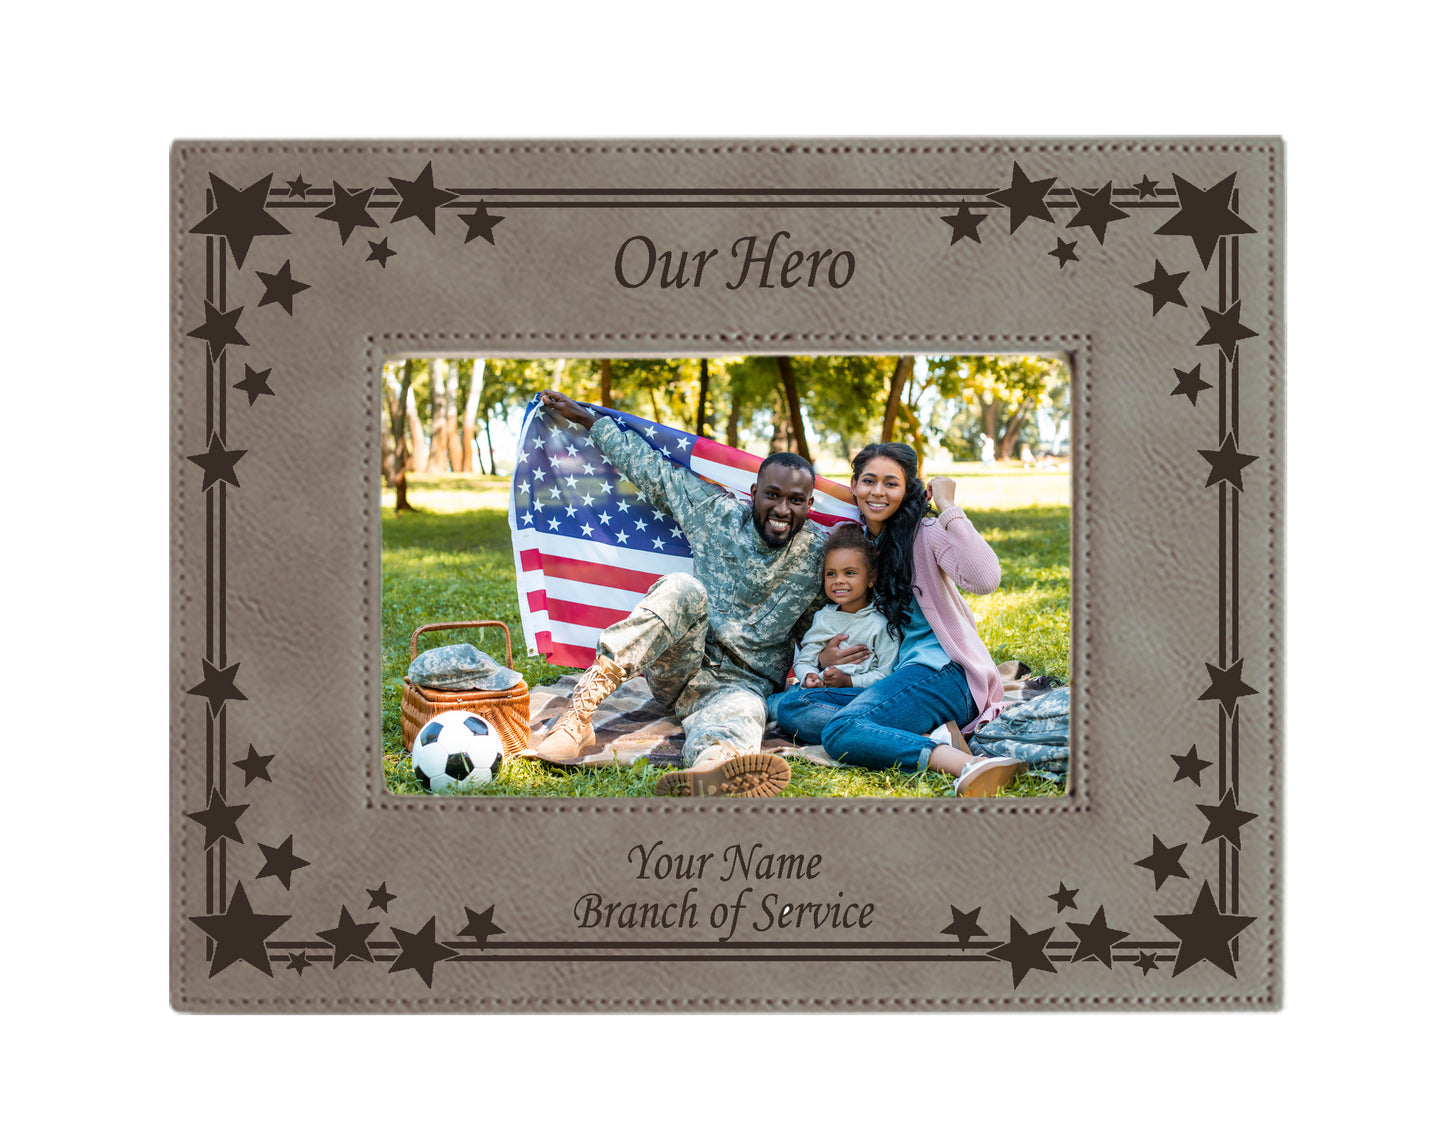 Personalized Our Hero Picture Frame 5"X7" Available in 2 Colors